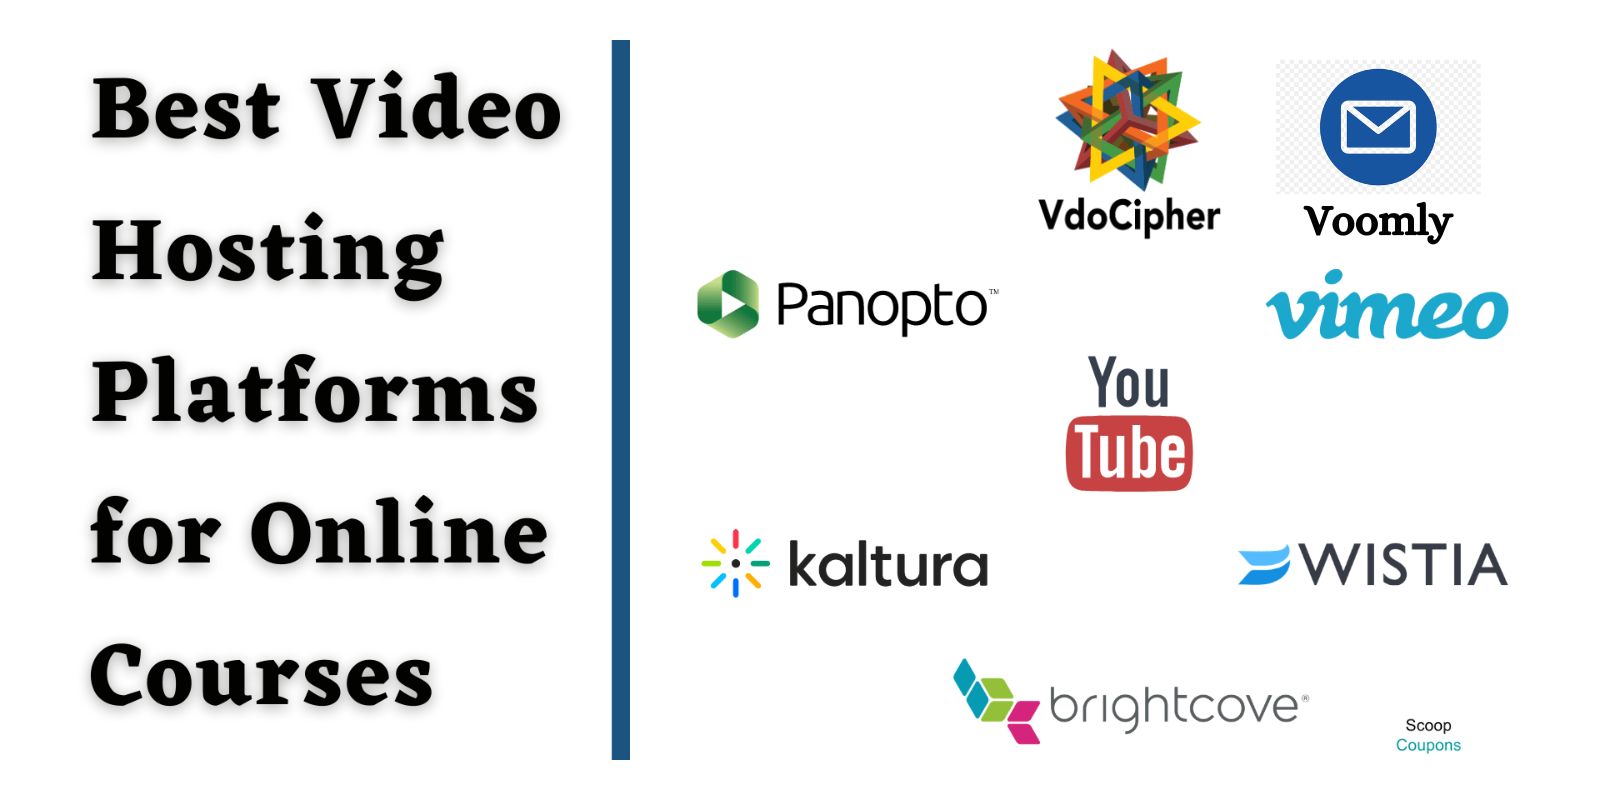 The 7 Top Video Hosting Platforms For Online Courses